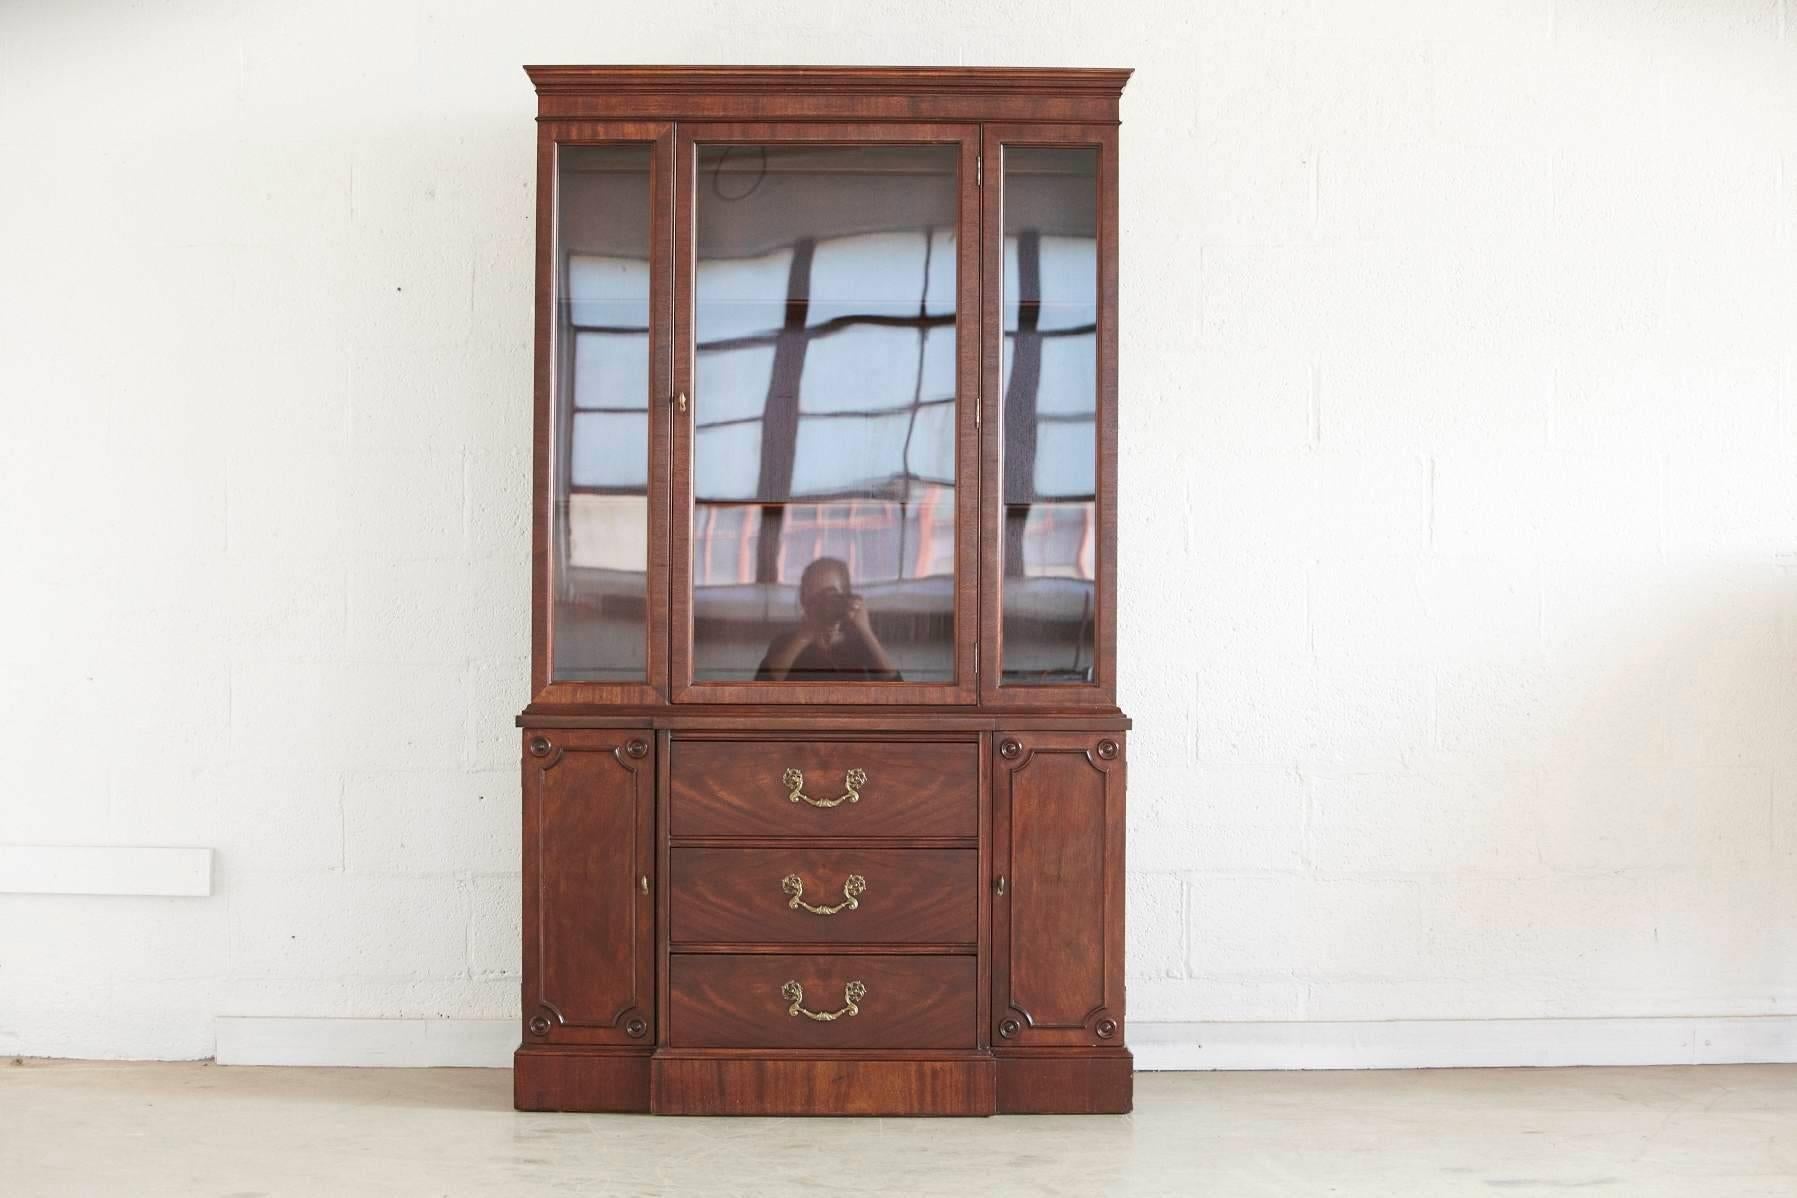 Walnut china cabinet or hutch, features a three-drawer cabinet with brass pulls, two doors and a hutch with one large glass door.